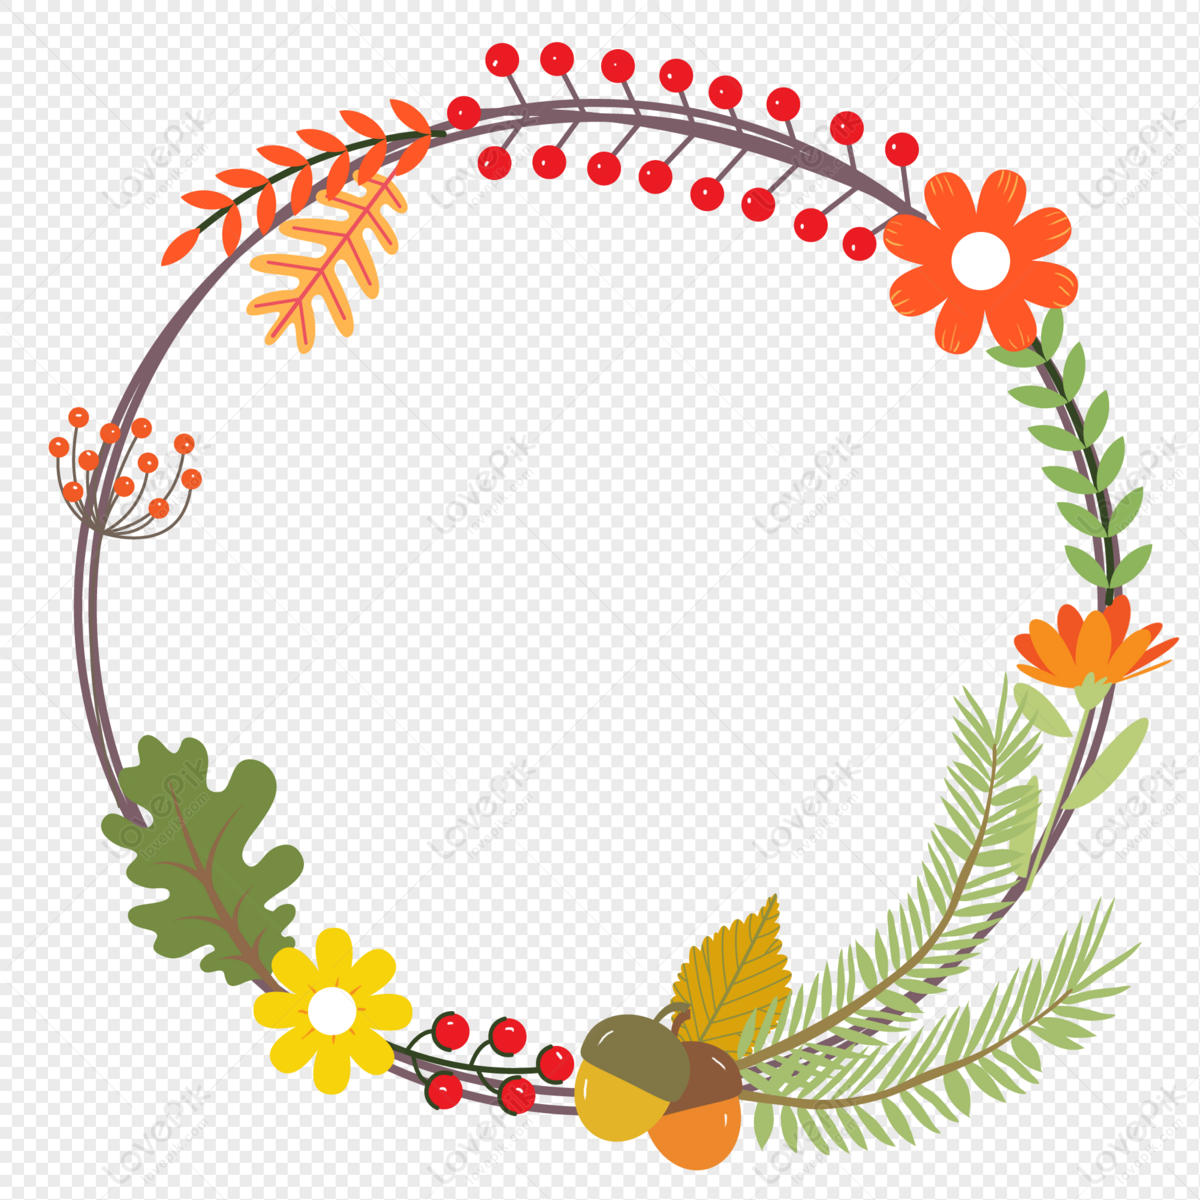 Flower, Flowers, Flowers, Flowers PNG Hd Transparent Image And Clipart ...